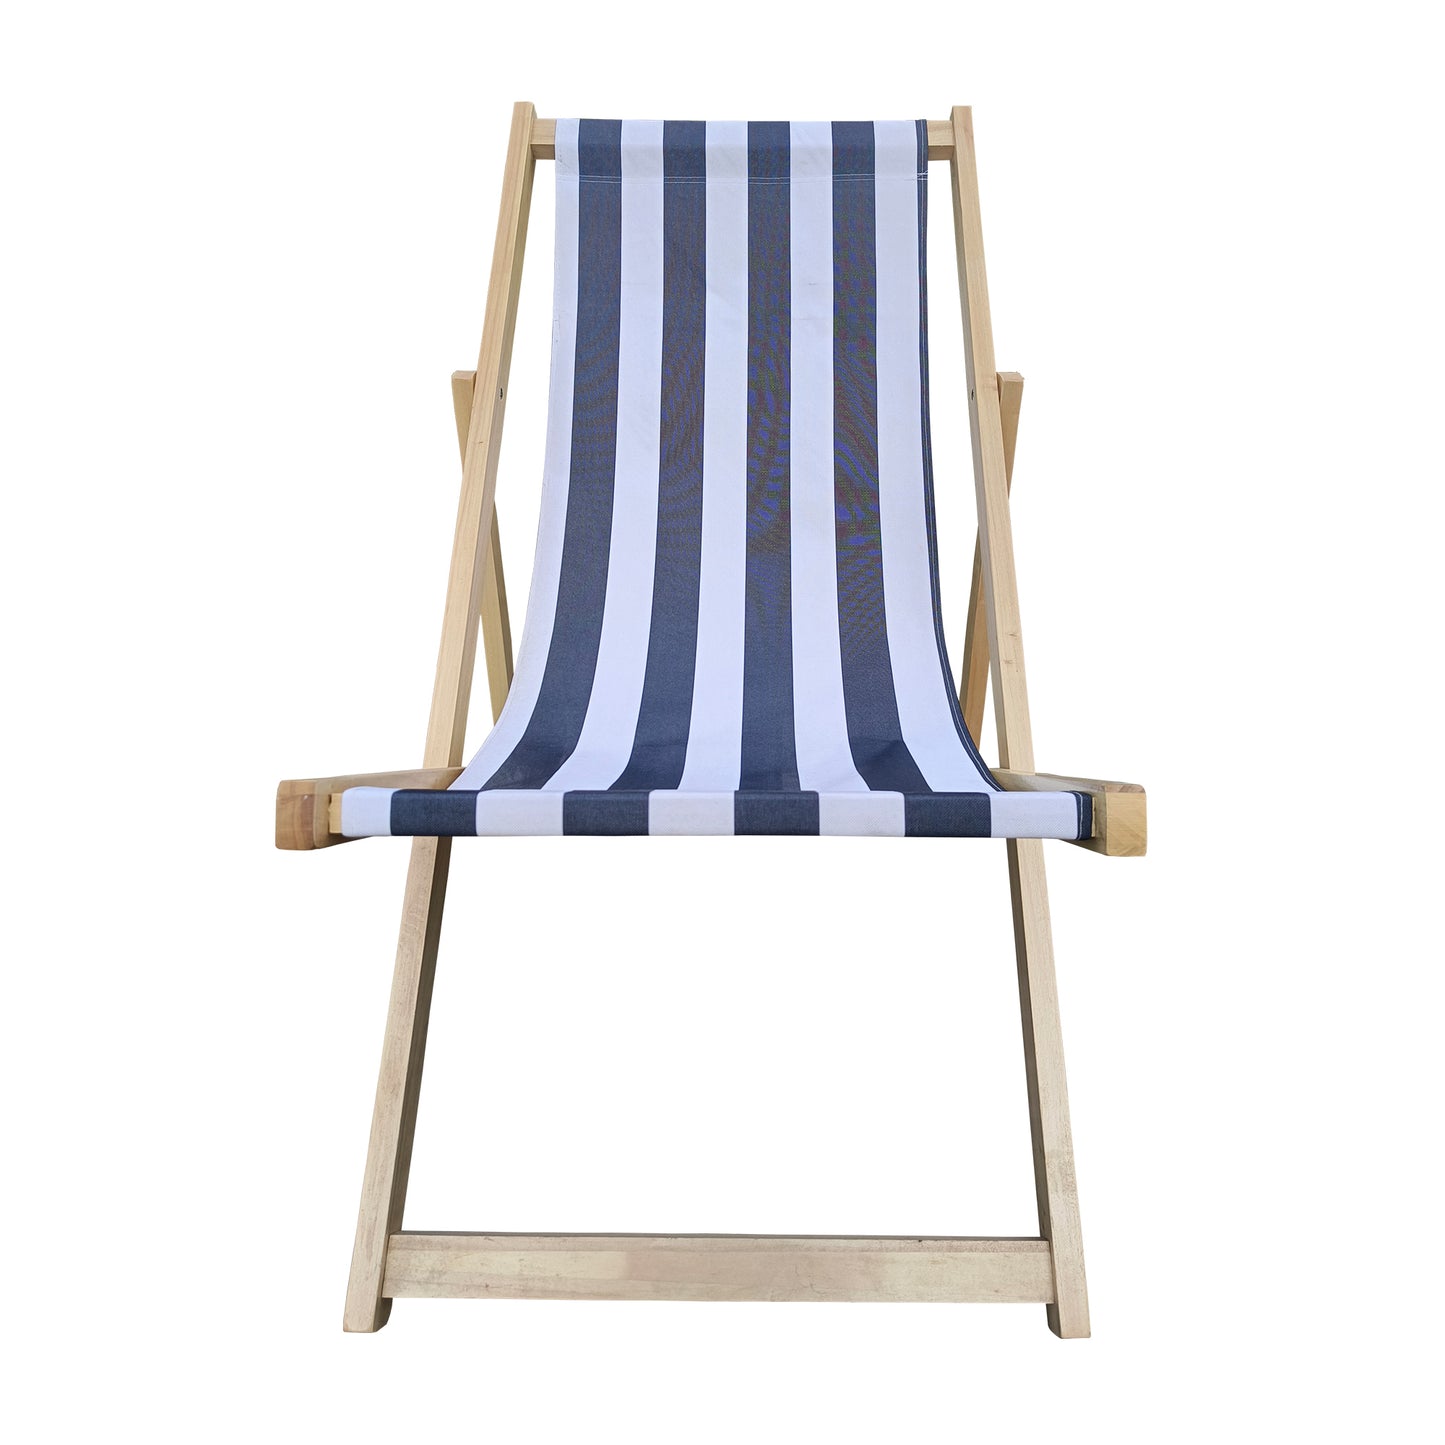 populus wood sling chair blue Stripe Broad blue Stripe （color: Dark blue）folding chaise lounge chair